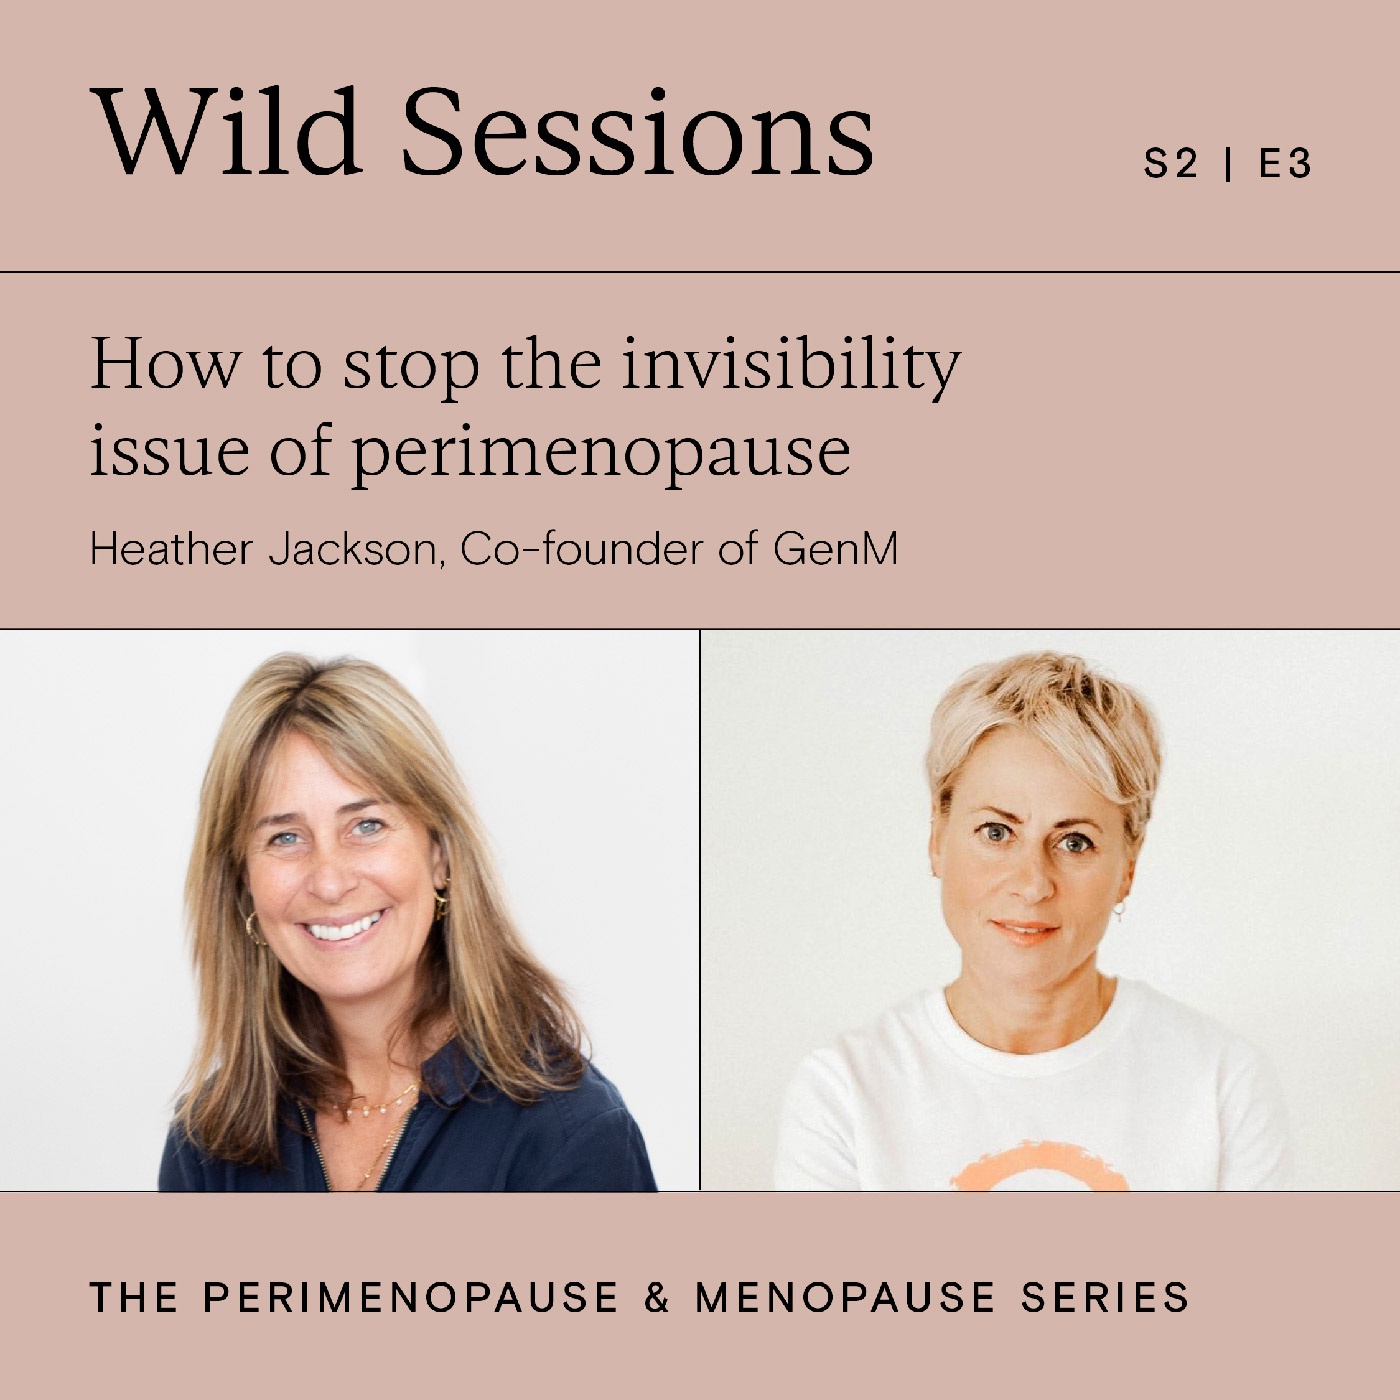 S2 | E3 How to stop the invisibility issue of perimenopause